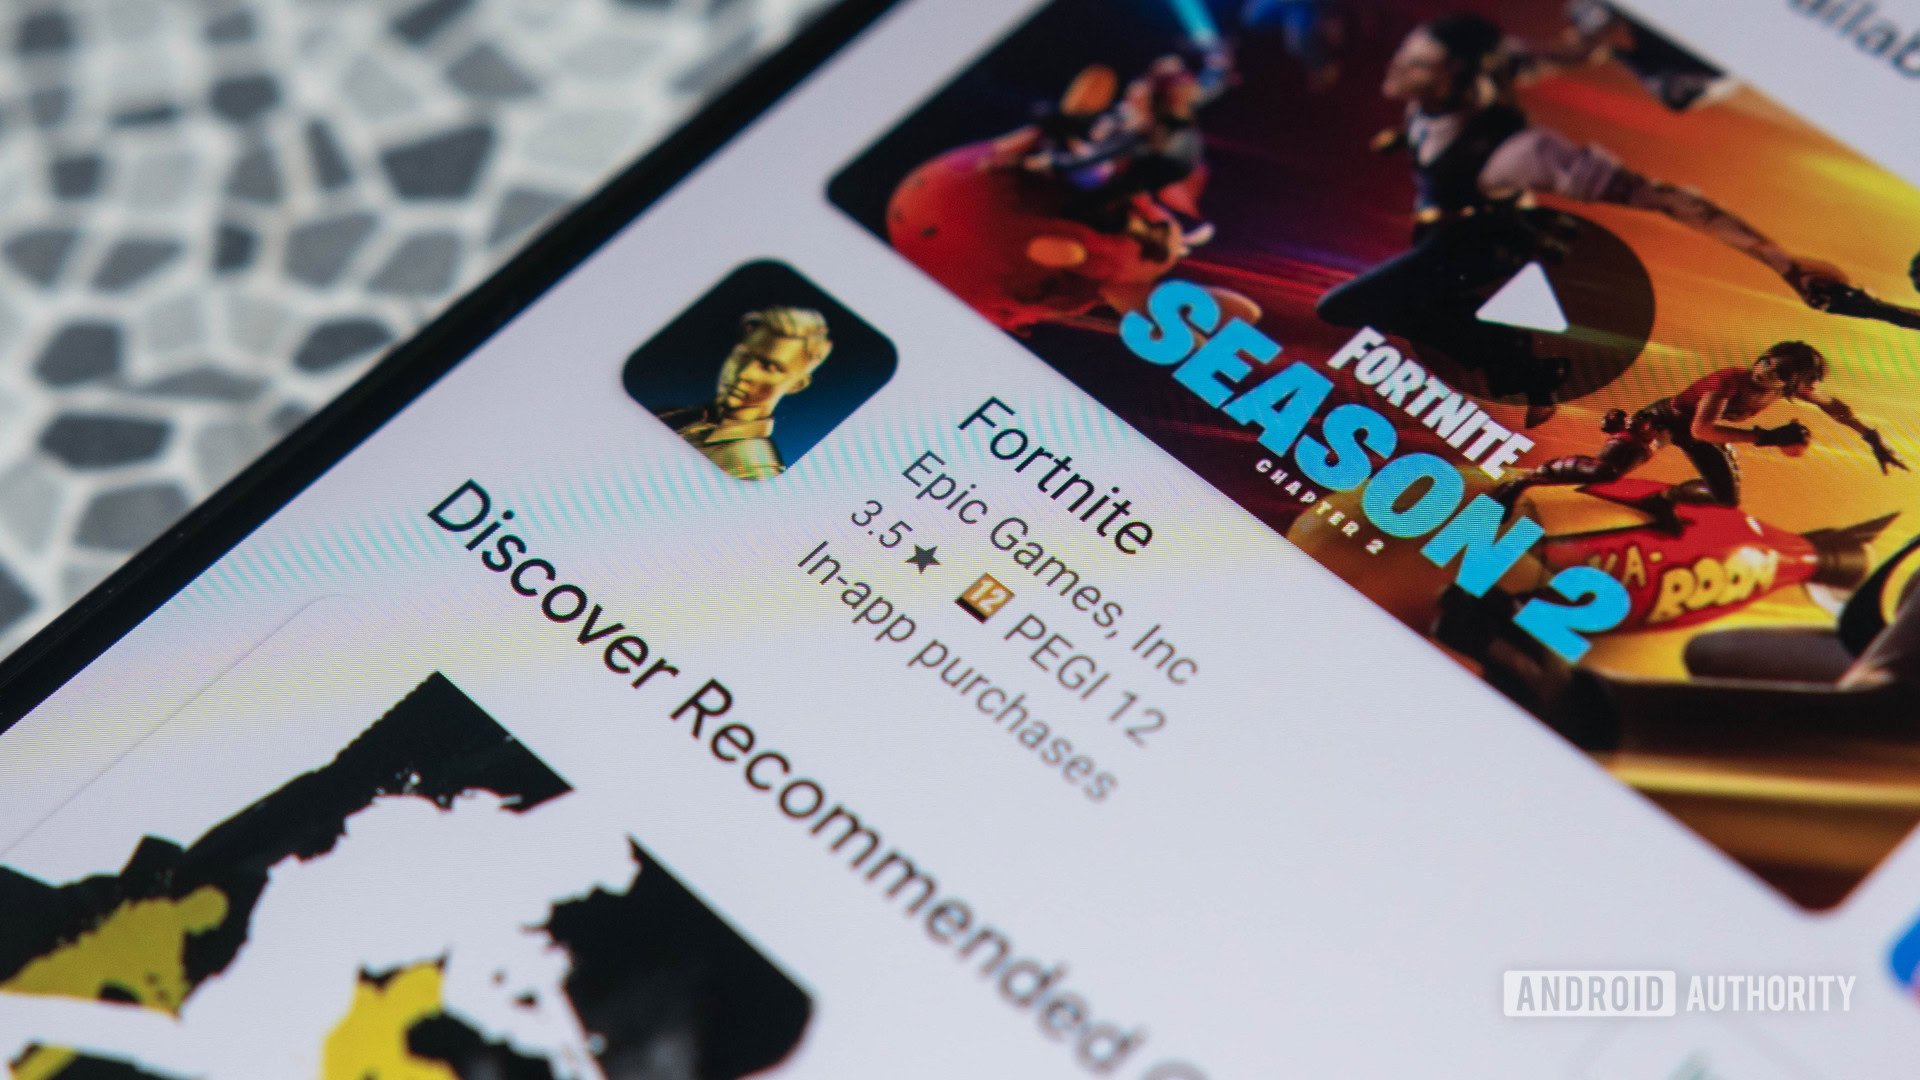 Epic Games app for Android replaces Fortnite Installer - 9to5Google